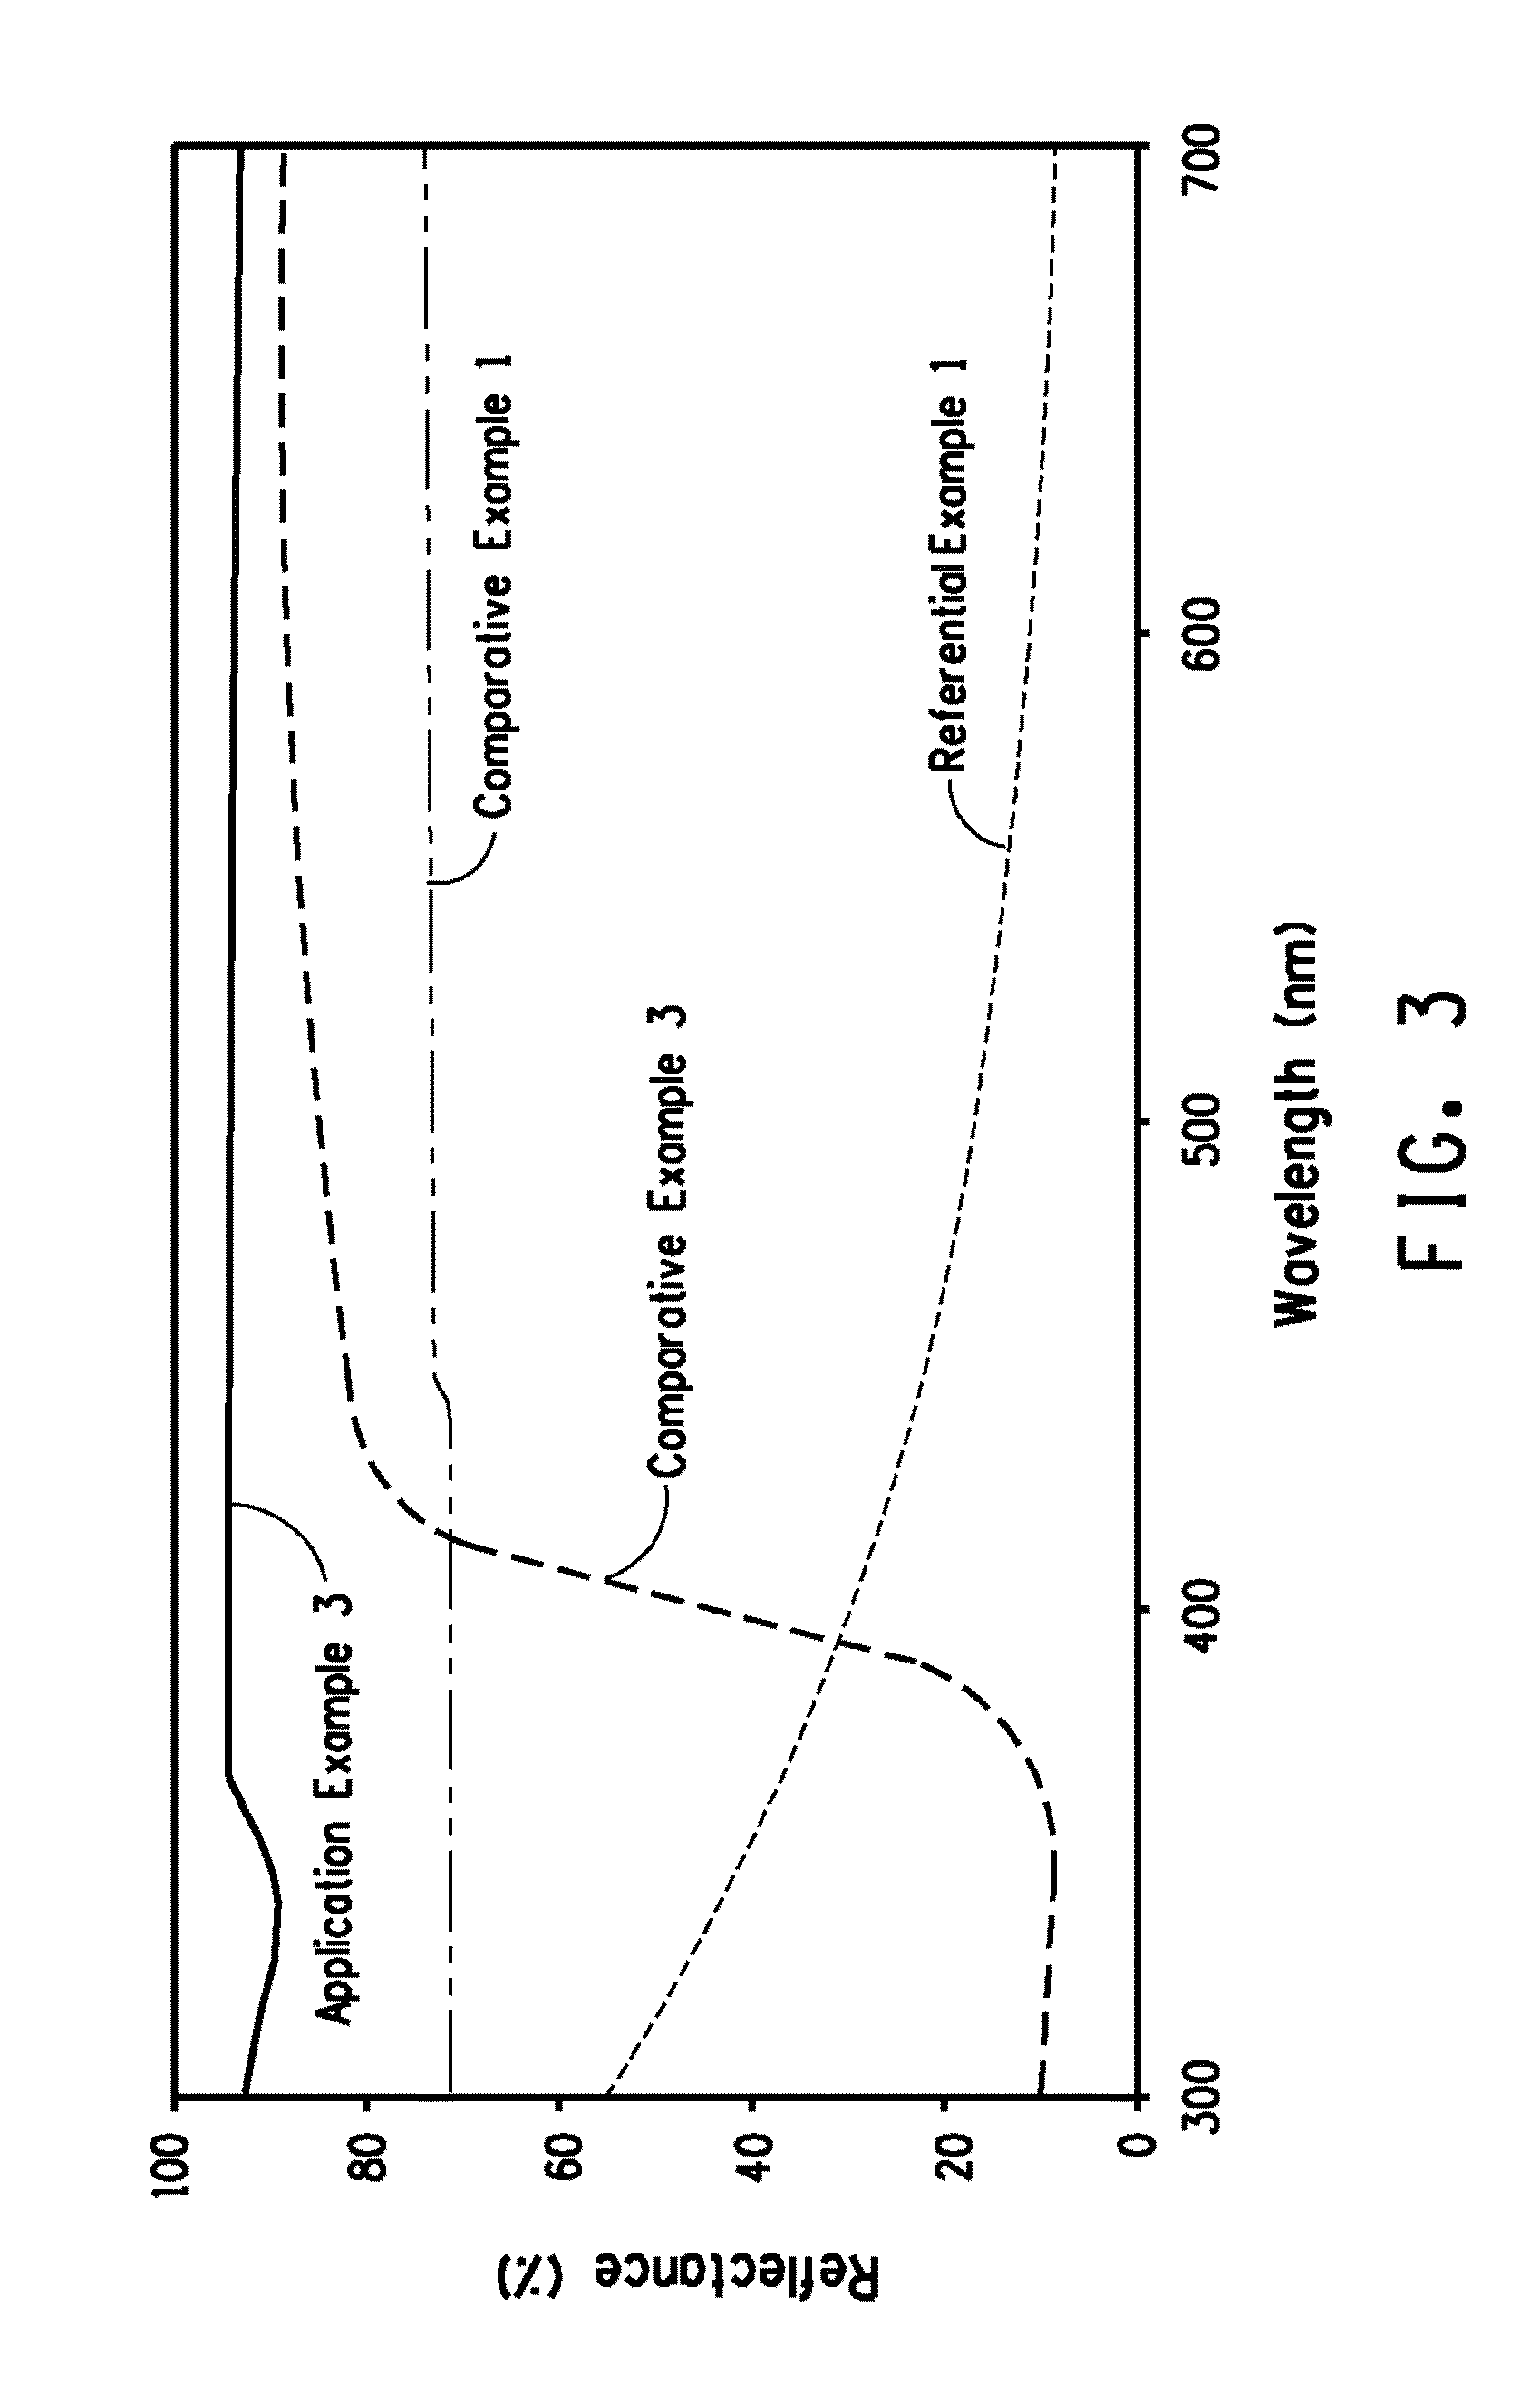 Reflector for light-emitting diode and housing